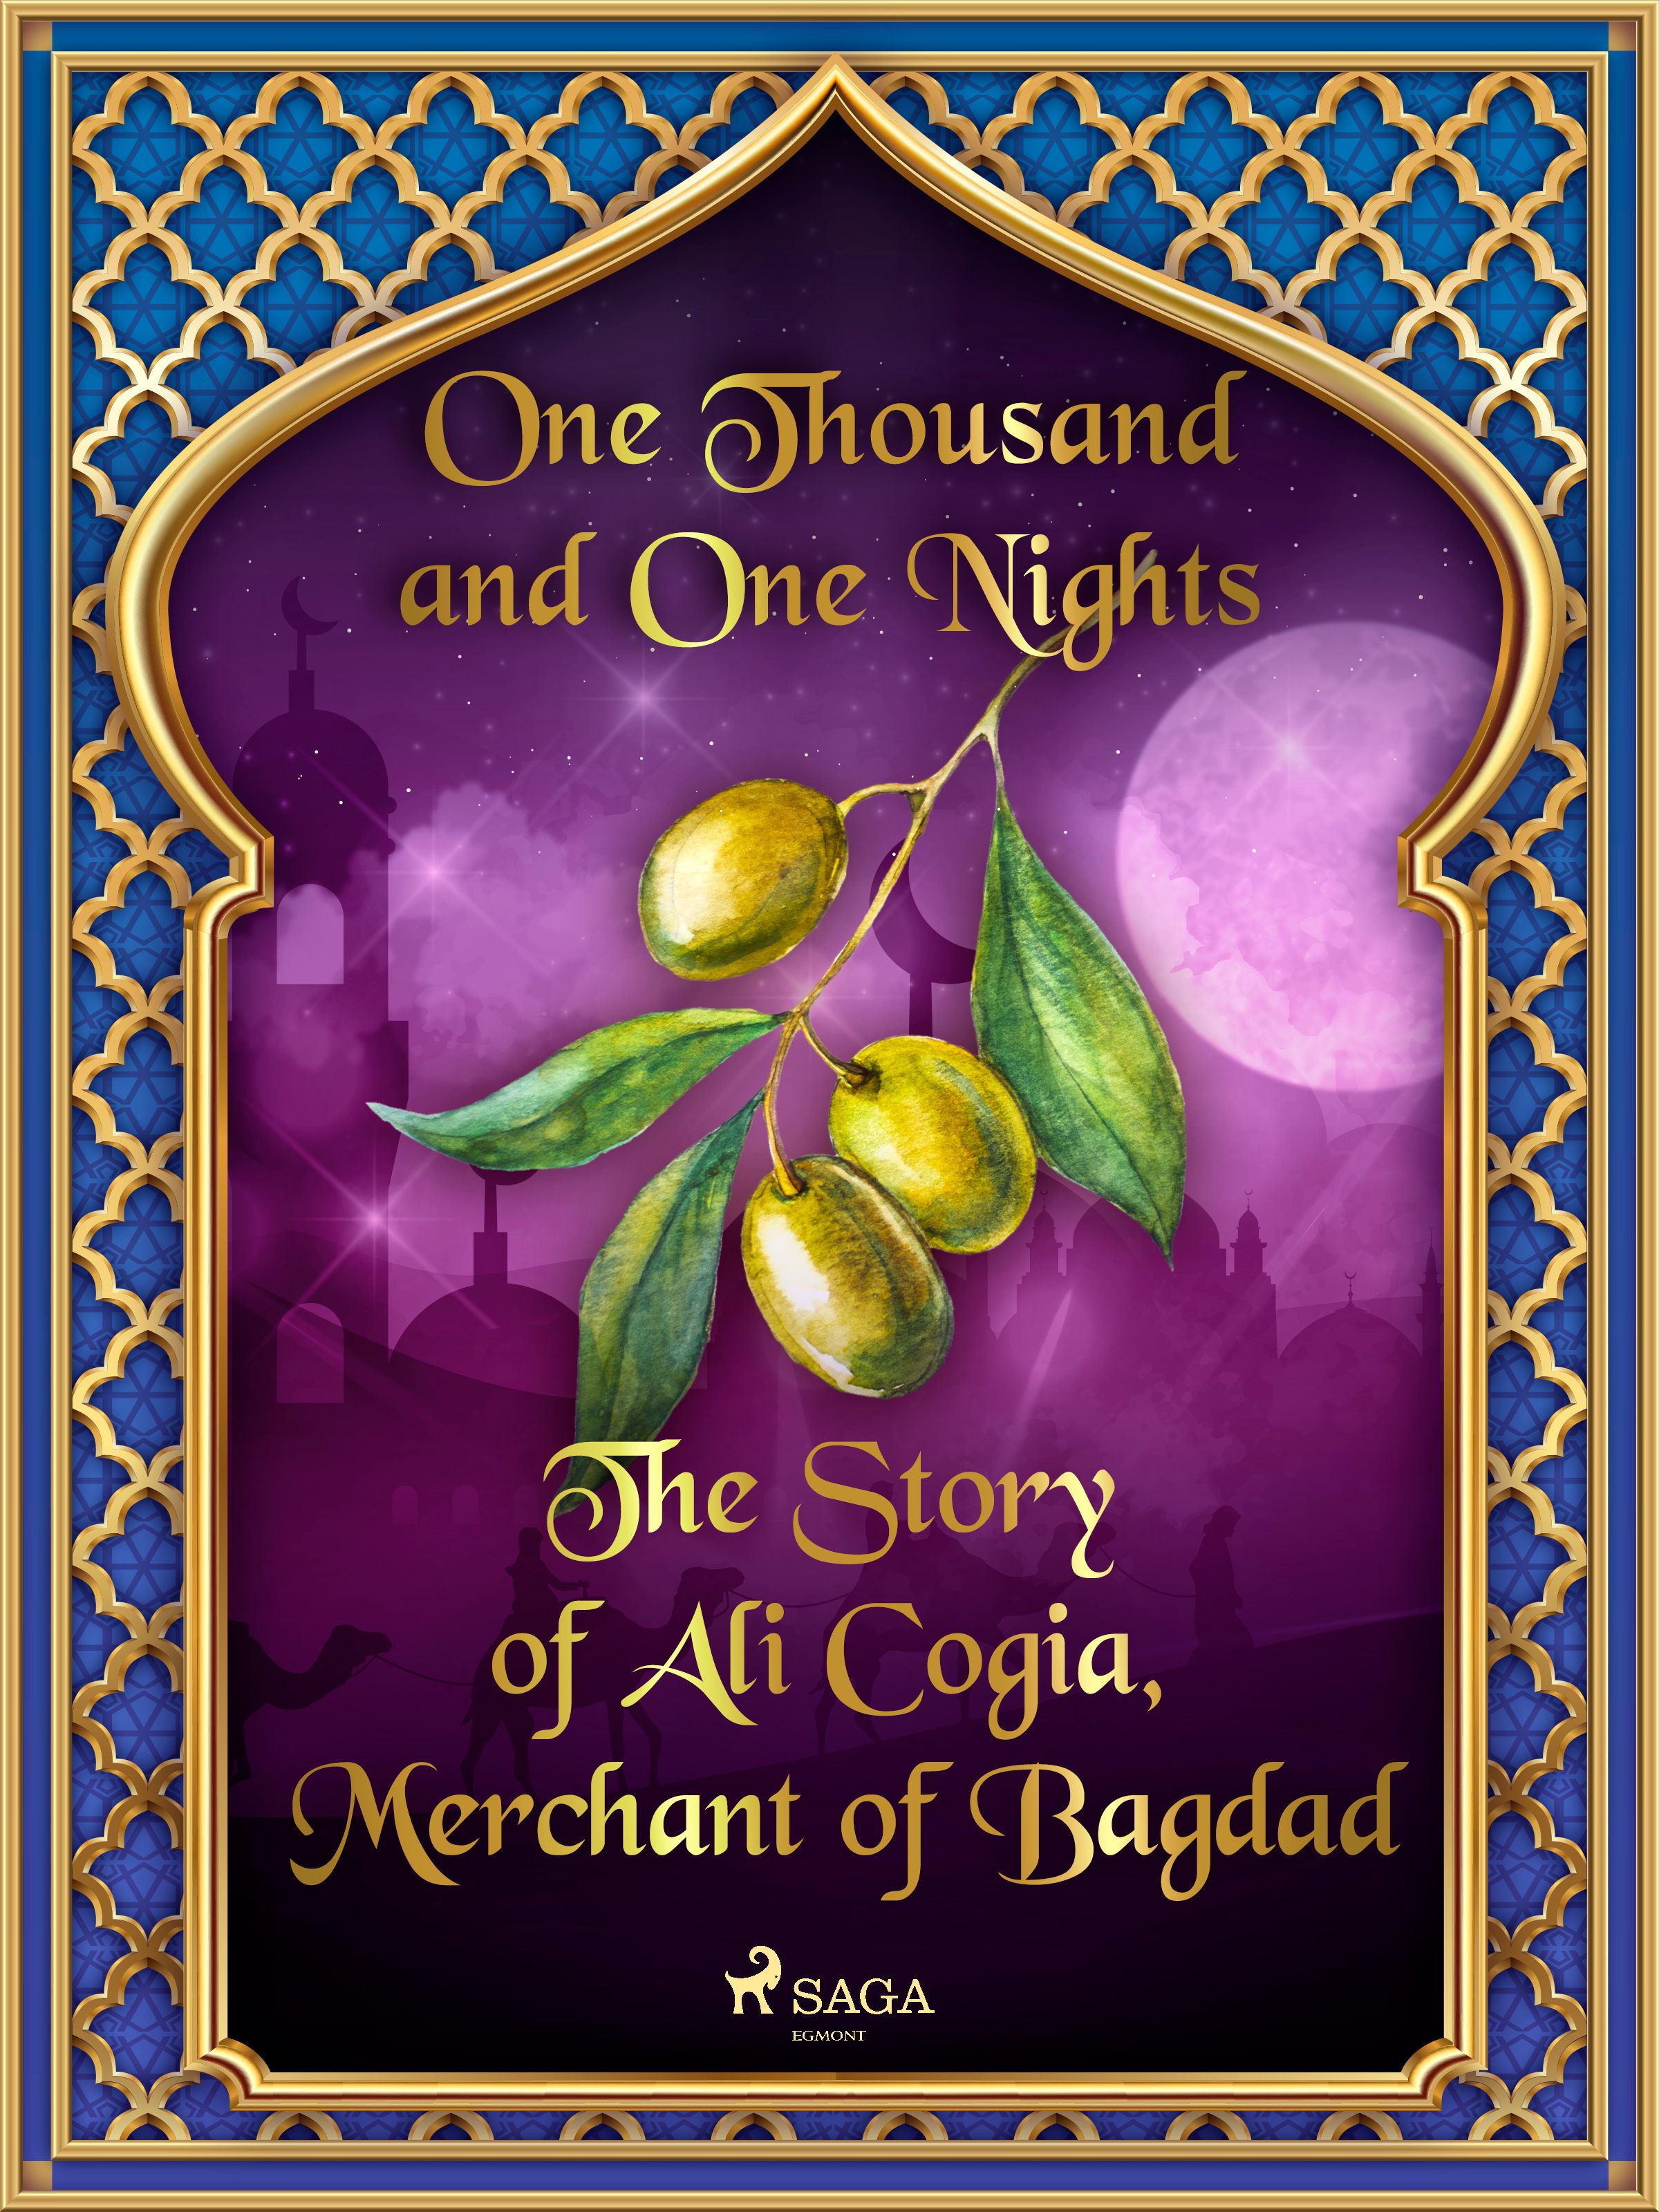 The Story of Ali Cogia, Merchant of Bagdad, e-bog af One Thousand and One Nights